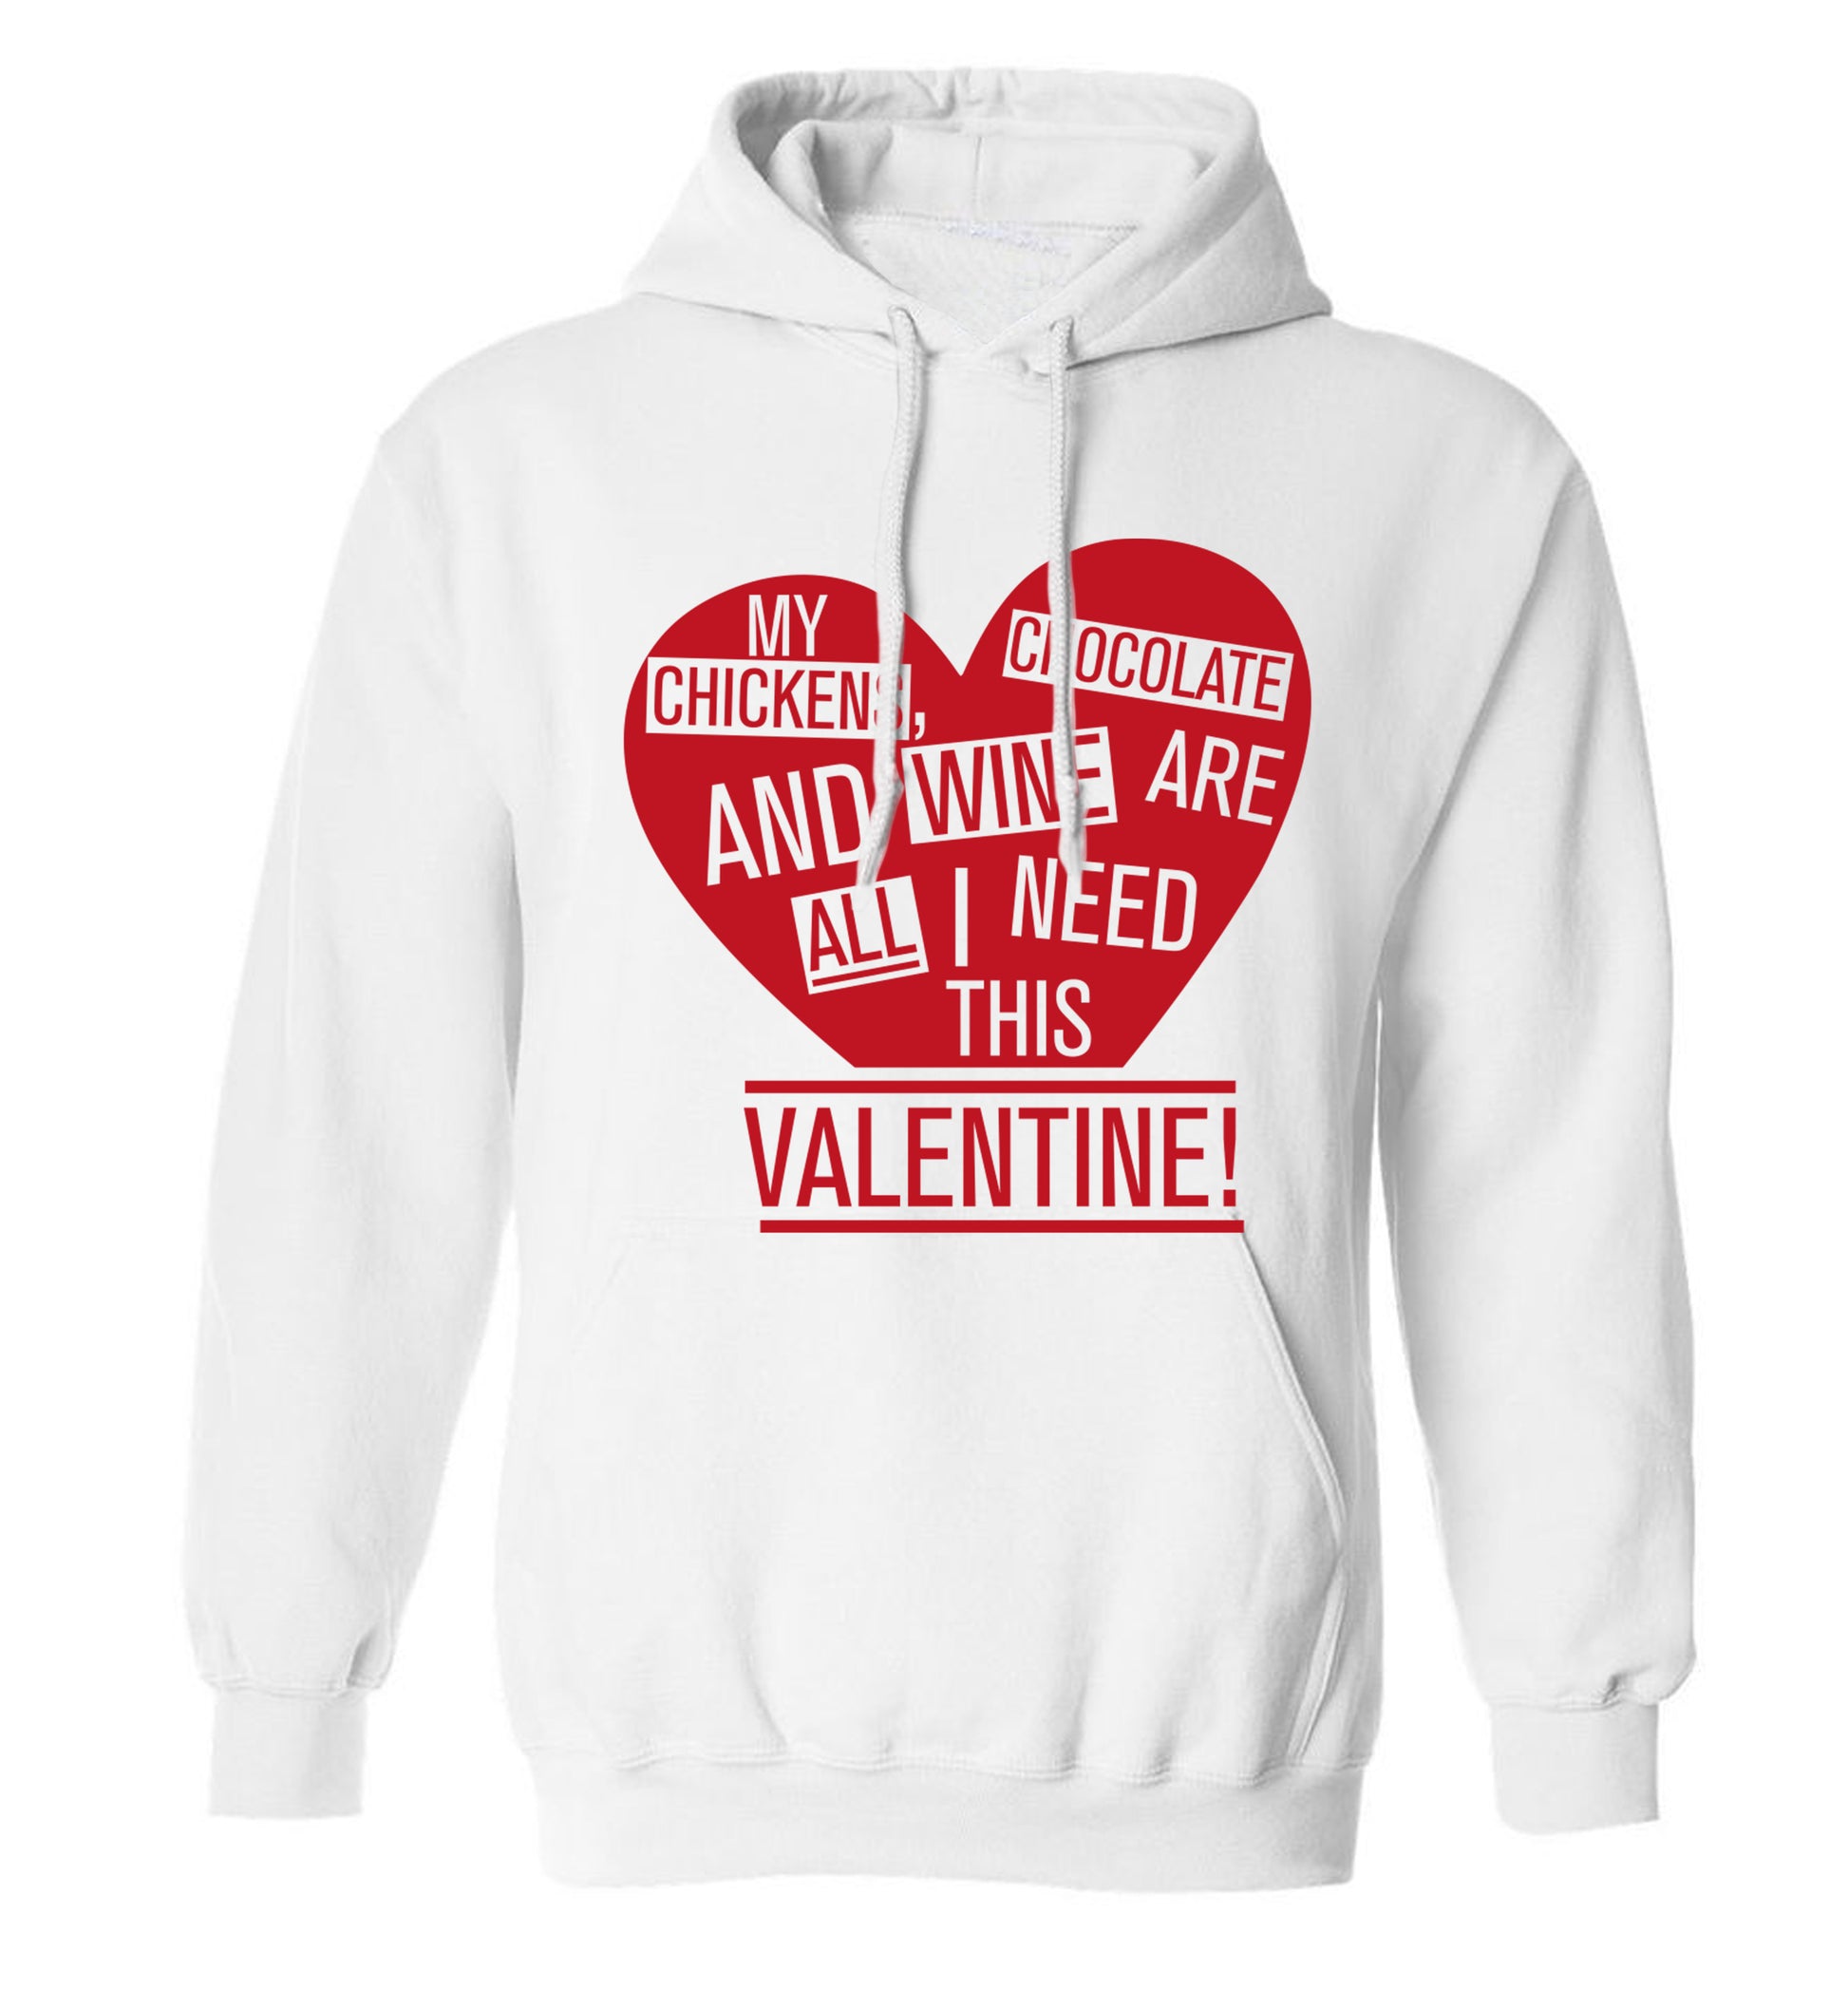 My chickens, chocolate and wine are all I need this valentine! adults unisex white hoodie 2XL